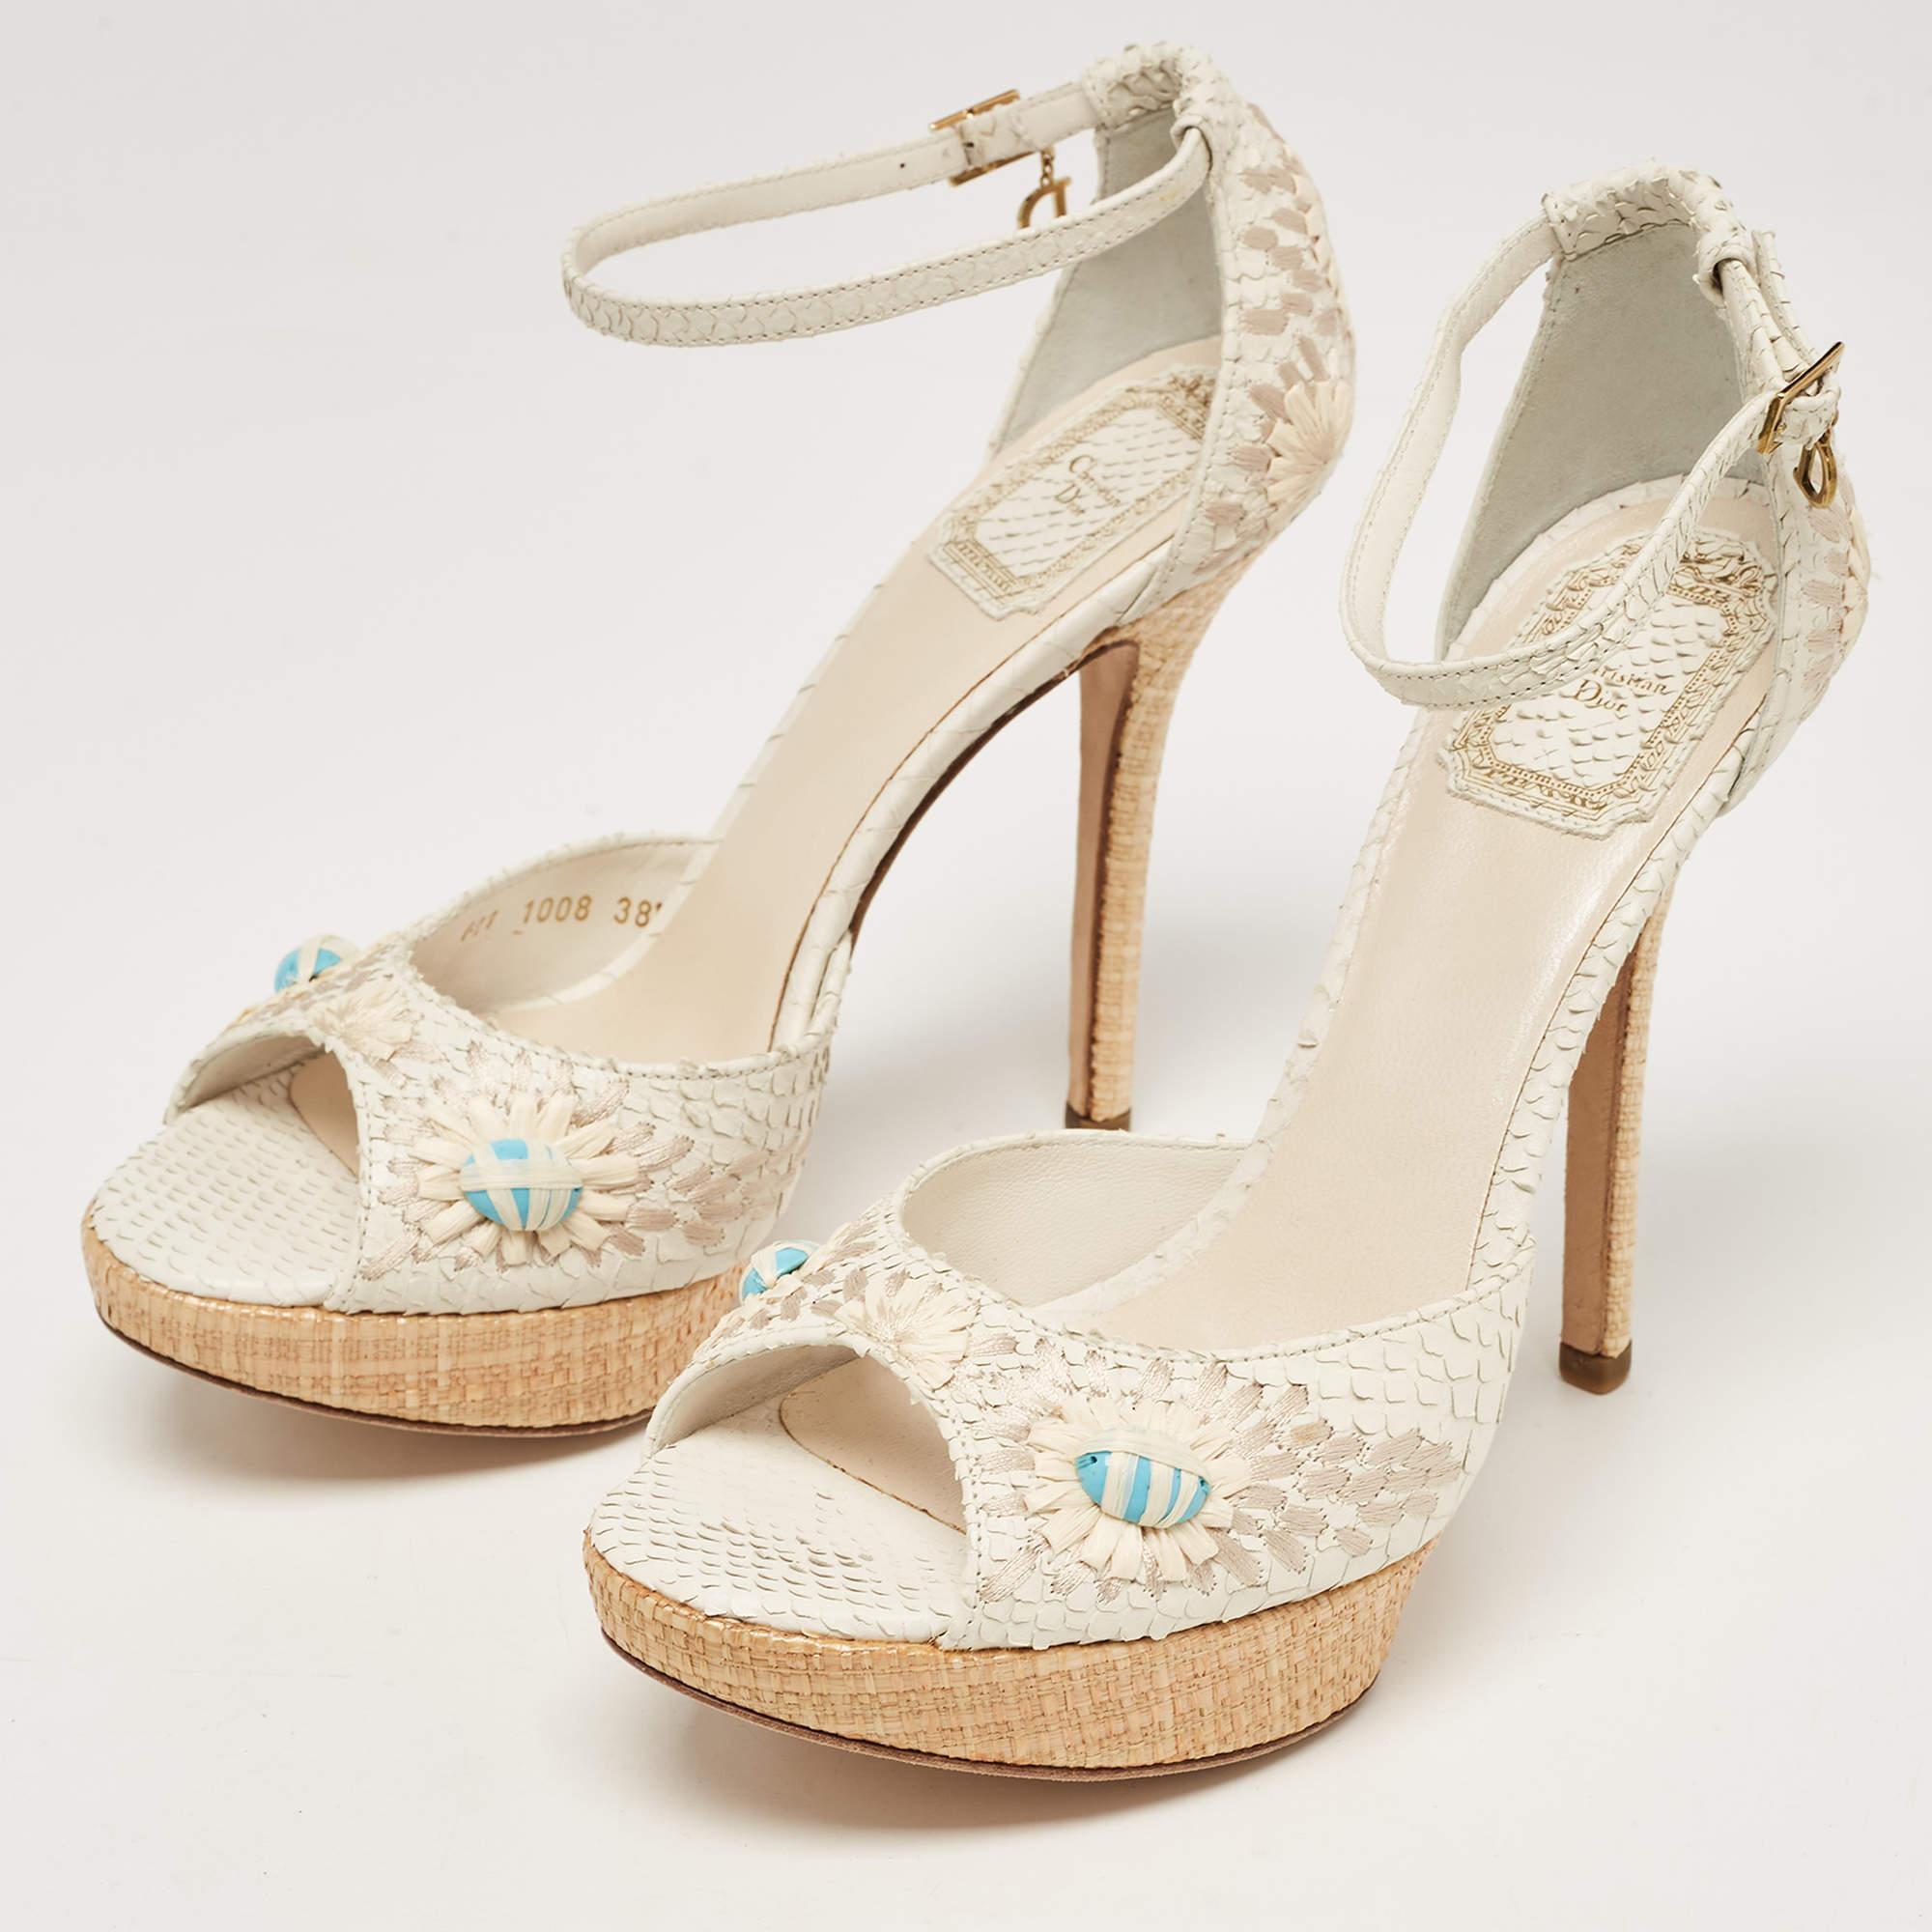 The Dior sandals feature a luxurious blend of white python leather and intricate floral embroidery. Elevated on a raffia platform, these sandals boast a stylish ankle strap for a sophisticated and fashion-forward statement.

